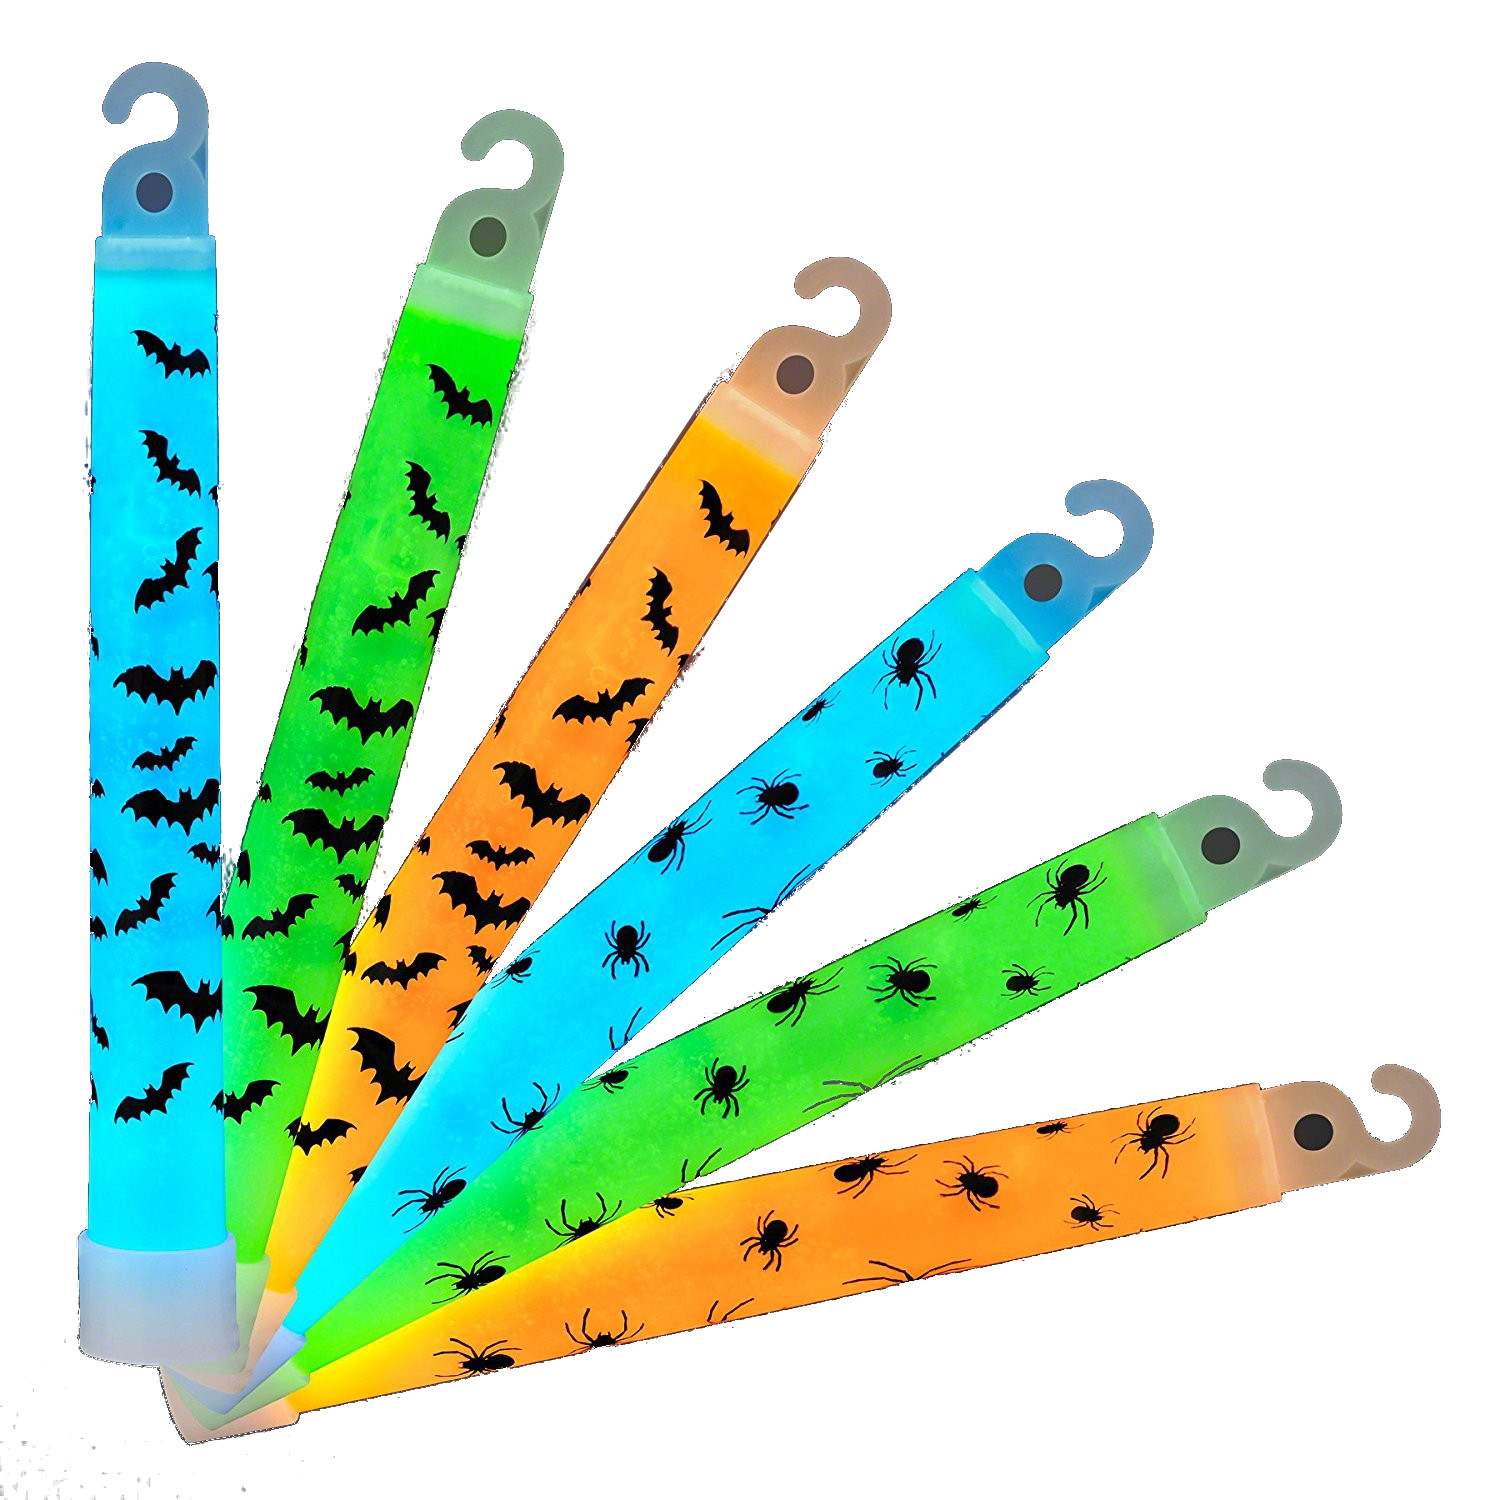 Halloween Spiders and Bats 6 Inch Glow Sticks Pack of 25 6 Inch Glow Sticks